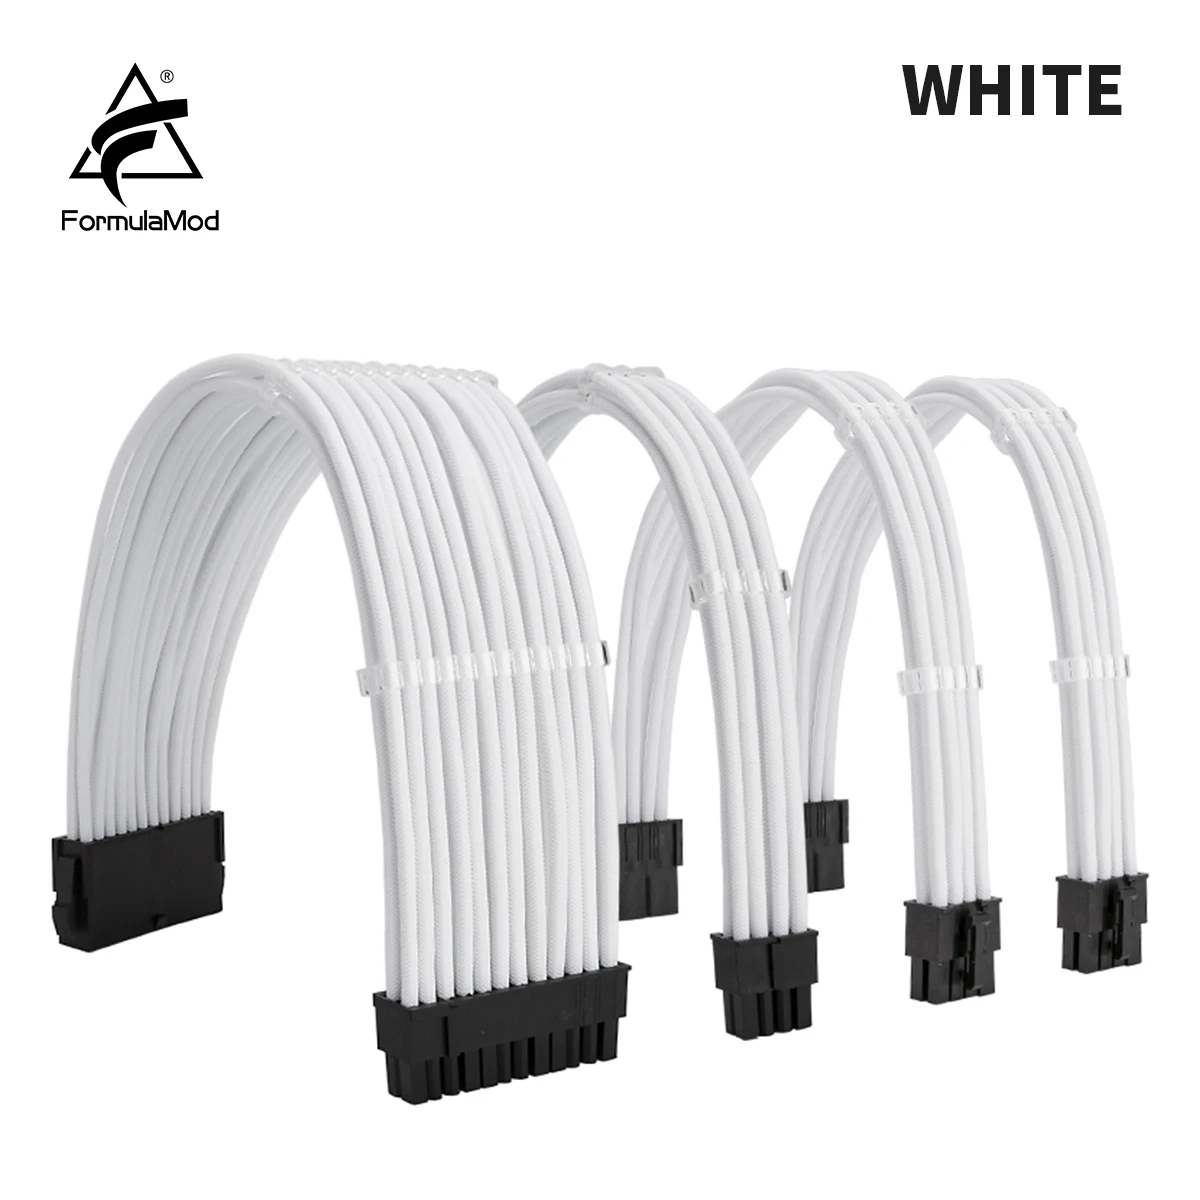 FormulaMod NCK1 Series PSU Extension Cable Kit , Solid Color Cable Solid Combo 300mm ATX24Pin PCI-E8Pin CPU8Pin With Combs  